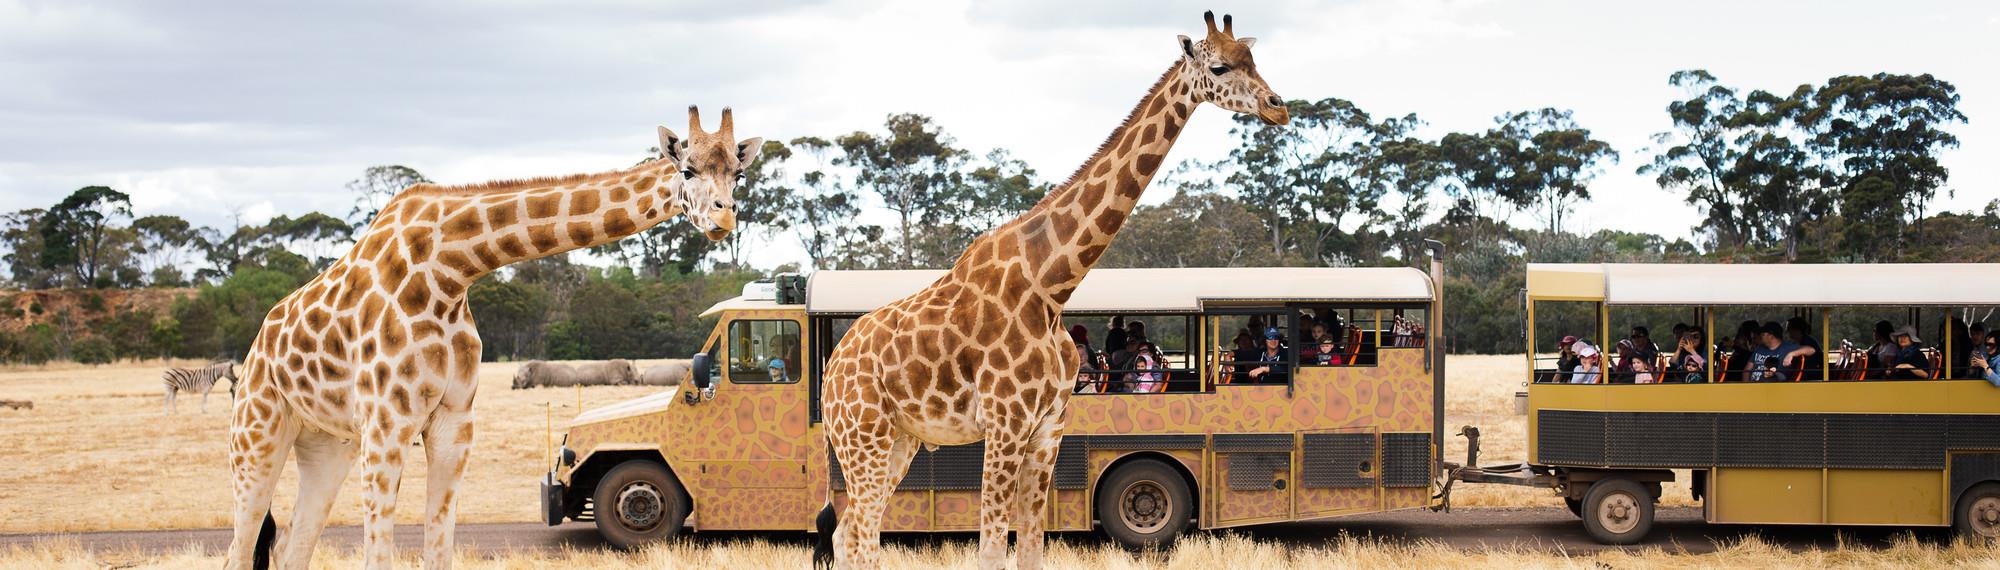 Two giraffes in front of the safari bus on the savannah